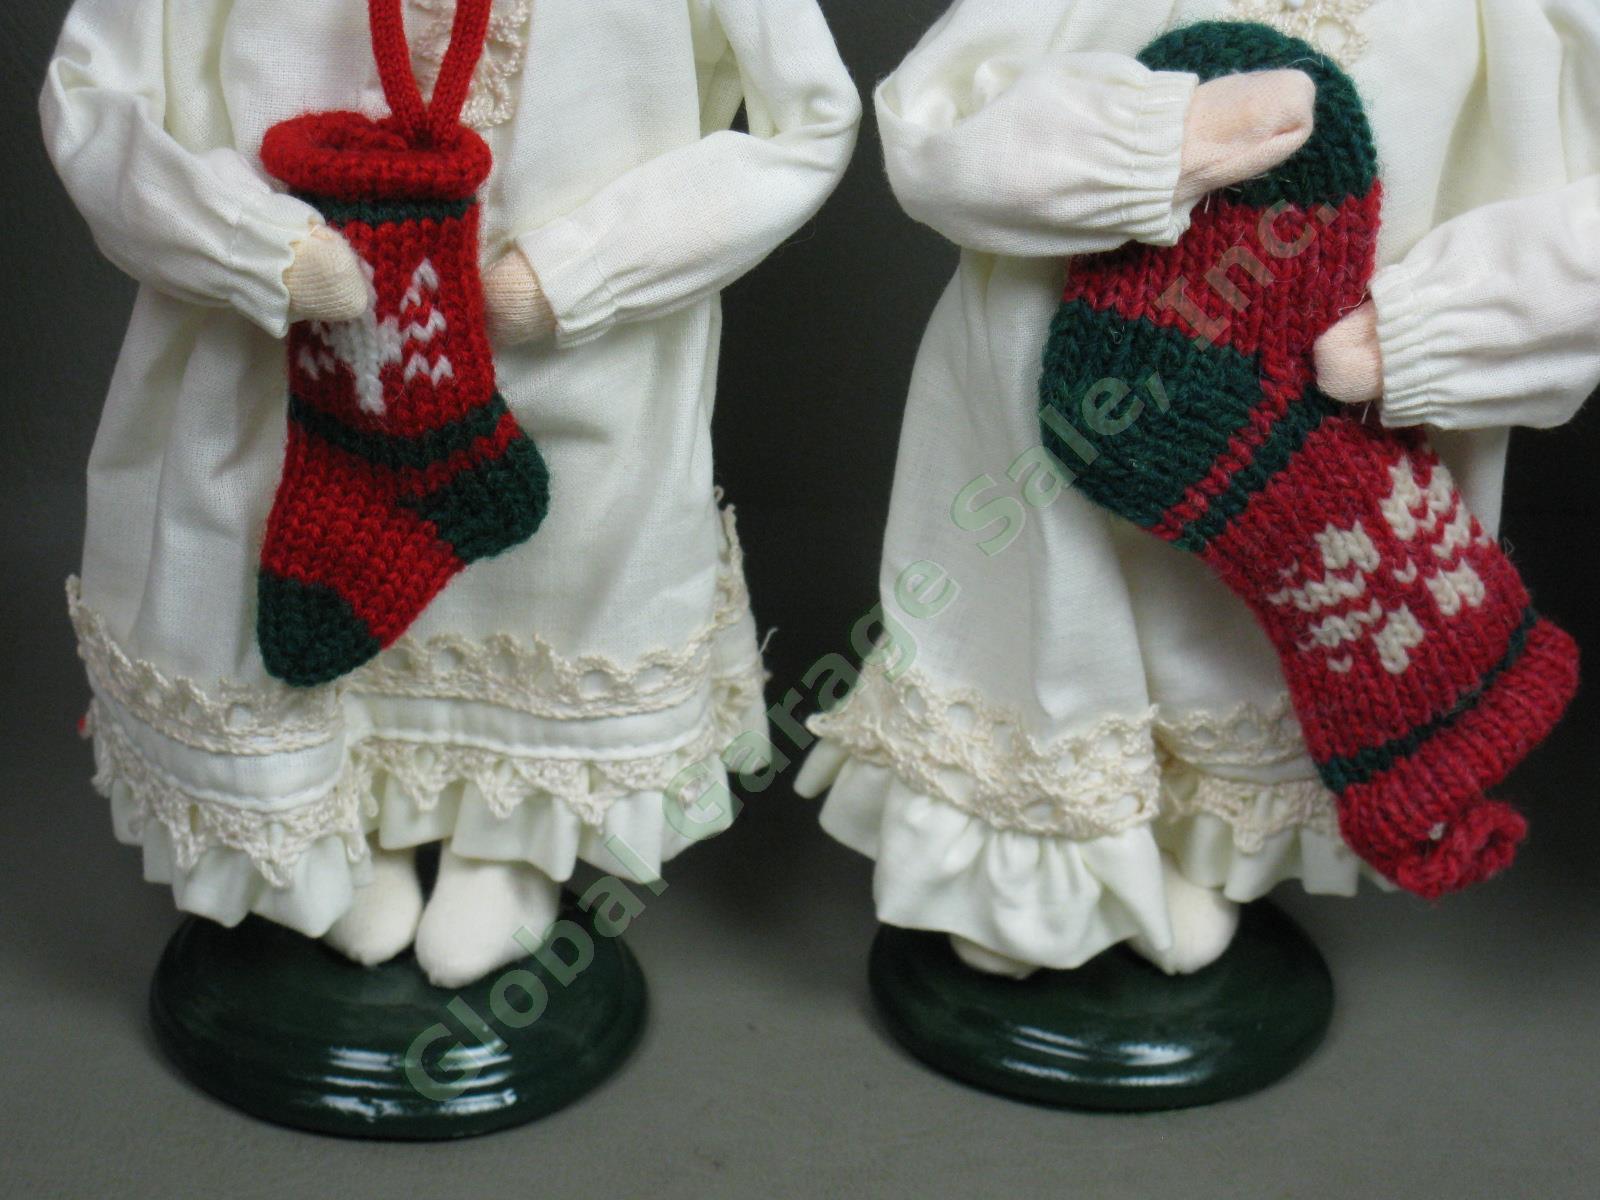 4 Signed Byers Choice Carolers Lot Child Girl With Stocking Man Woman Candle NR! 2